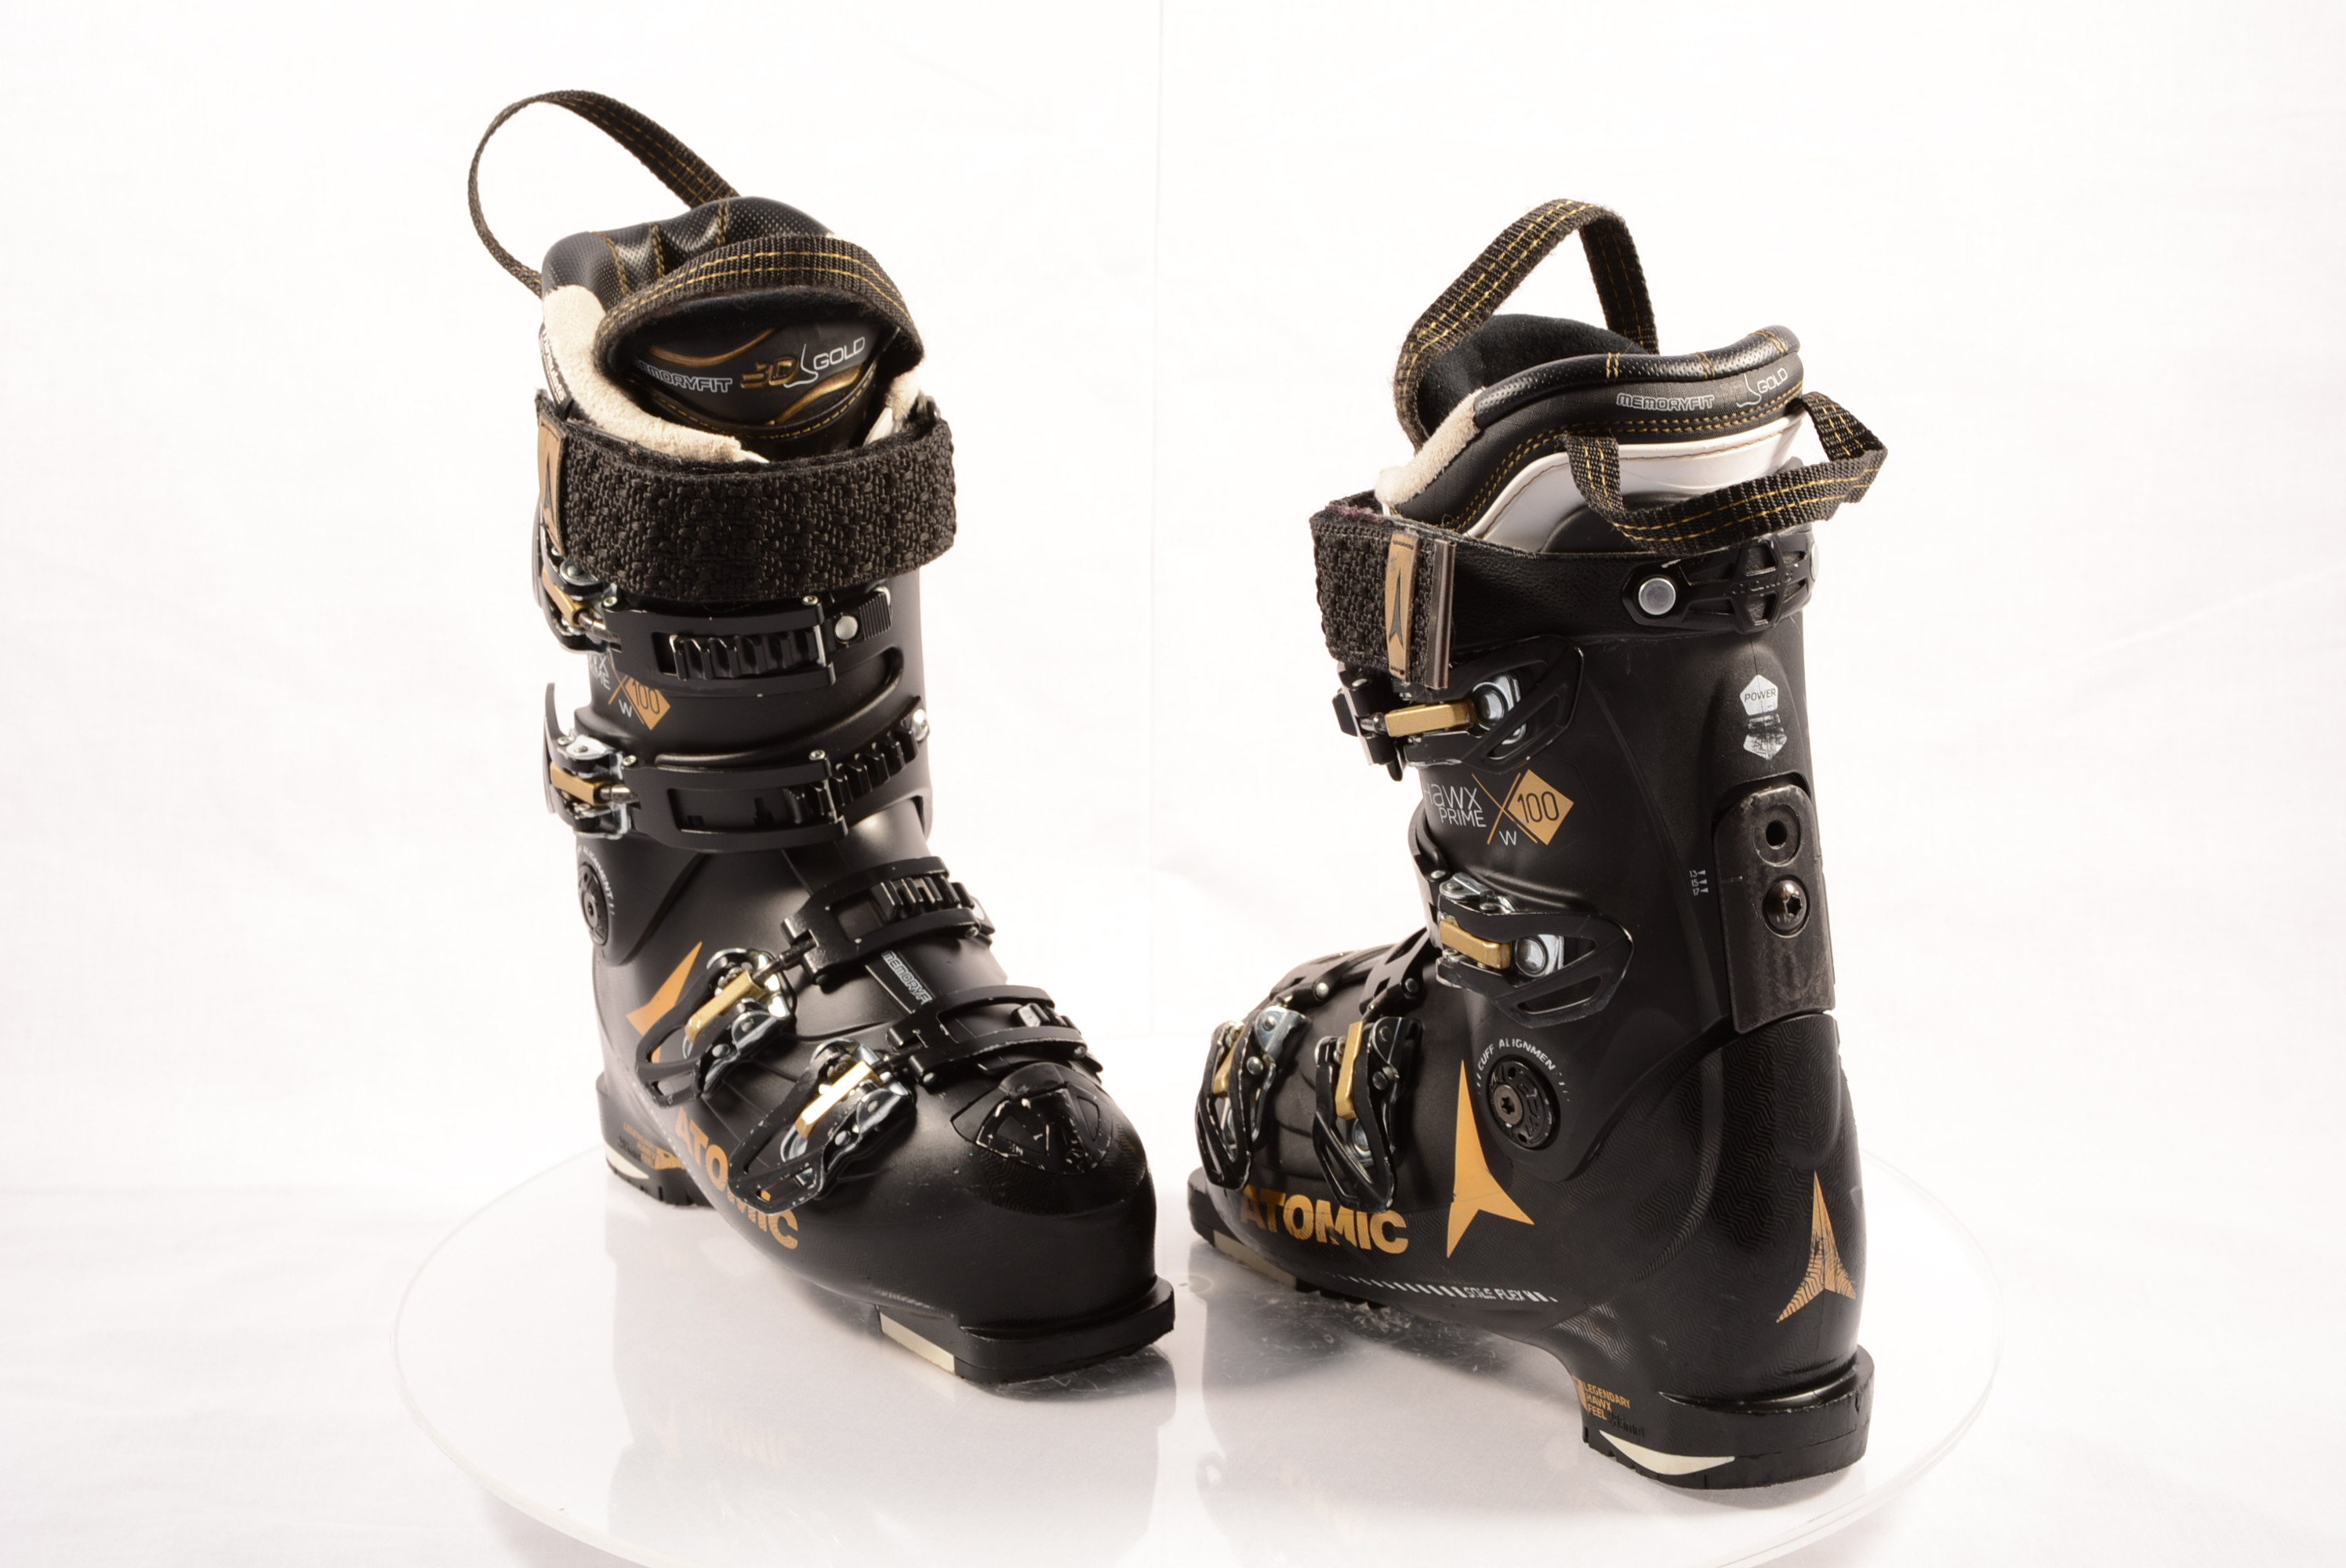 staal collegegeld oppervlakkig women's ski boots ATOMIC HAWX PRIME 100 W, THINSULATE, MEMORY FIT, 3D GOLD,  SOLE FLEX, canting ( TOP condition ) - Mardosport.com